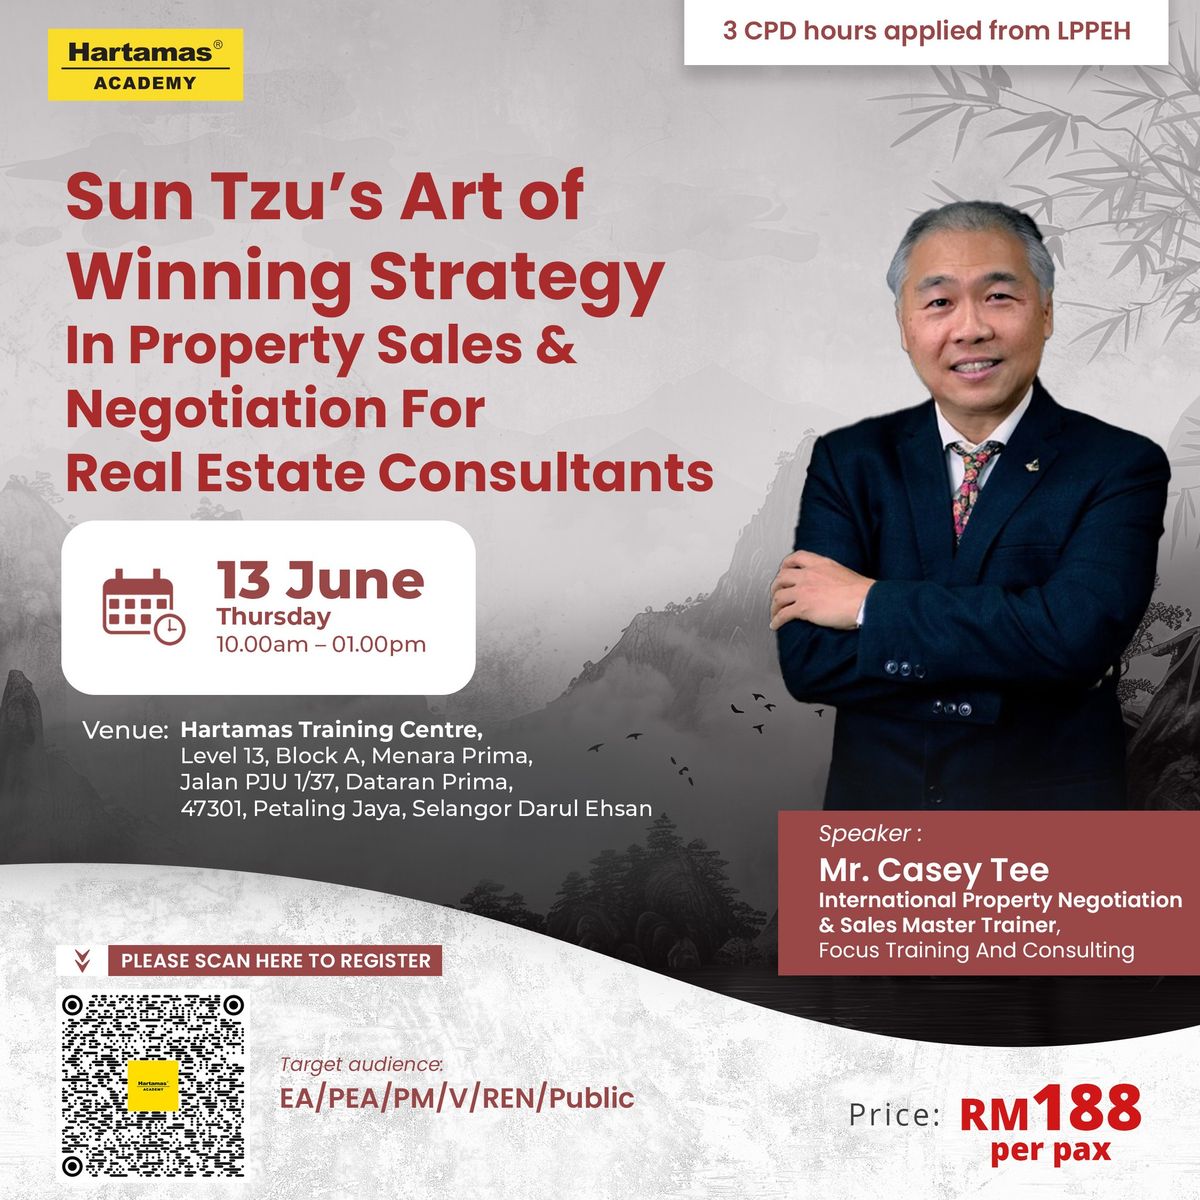 Sun Tzu\u2019s Art of Winning Strategy in Property Sales & Negotiation for Real Estate Consultants